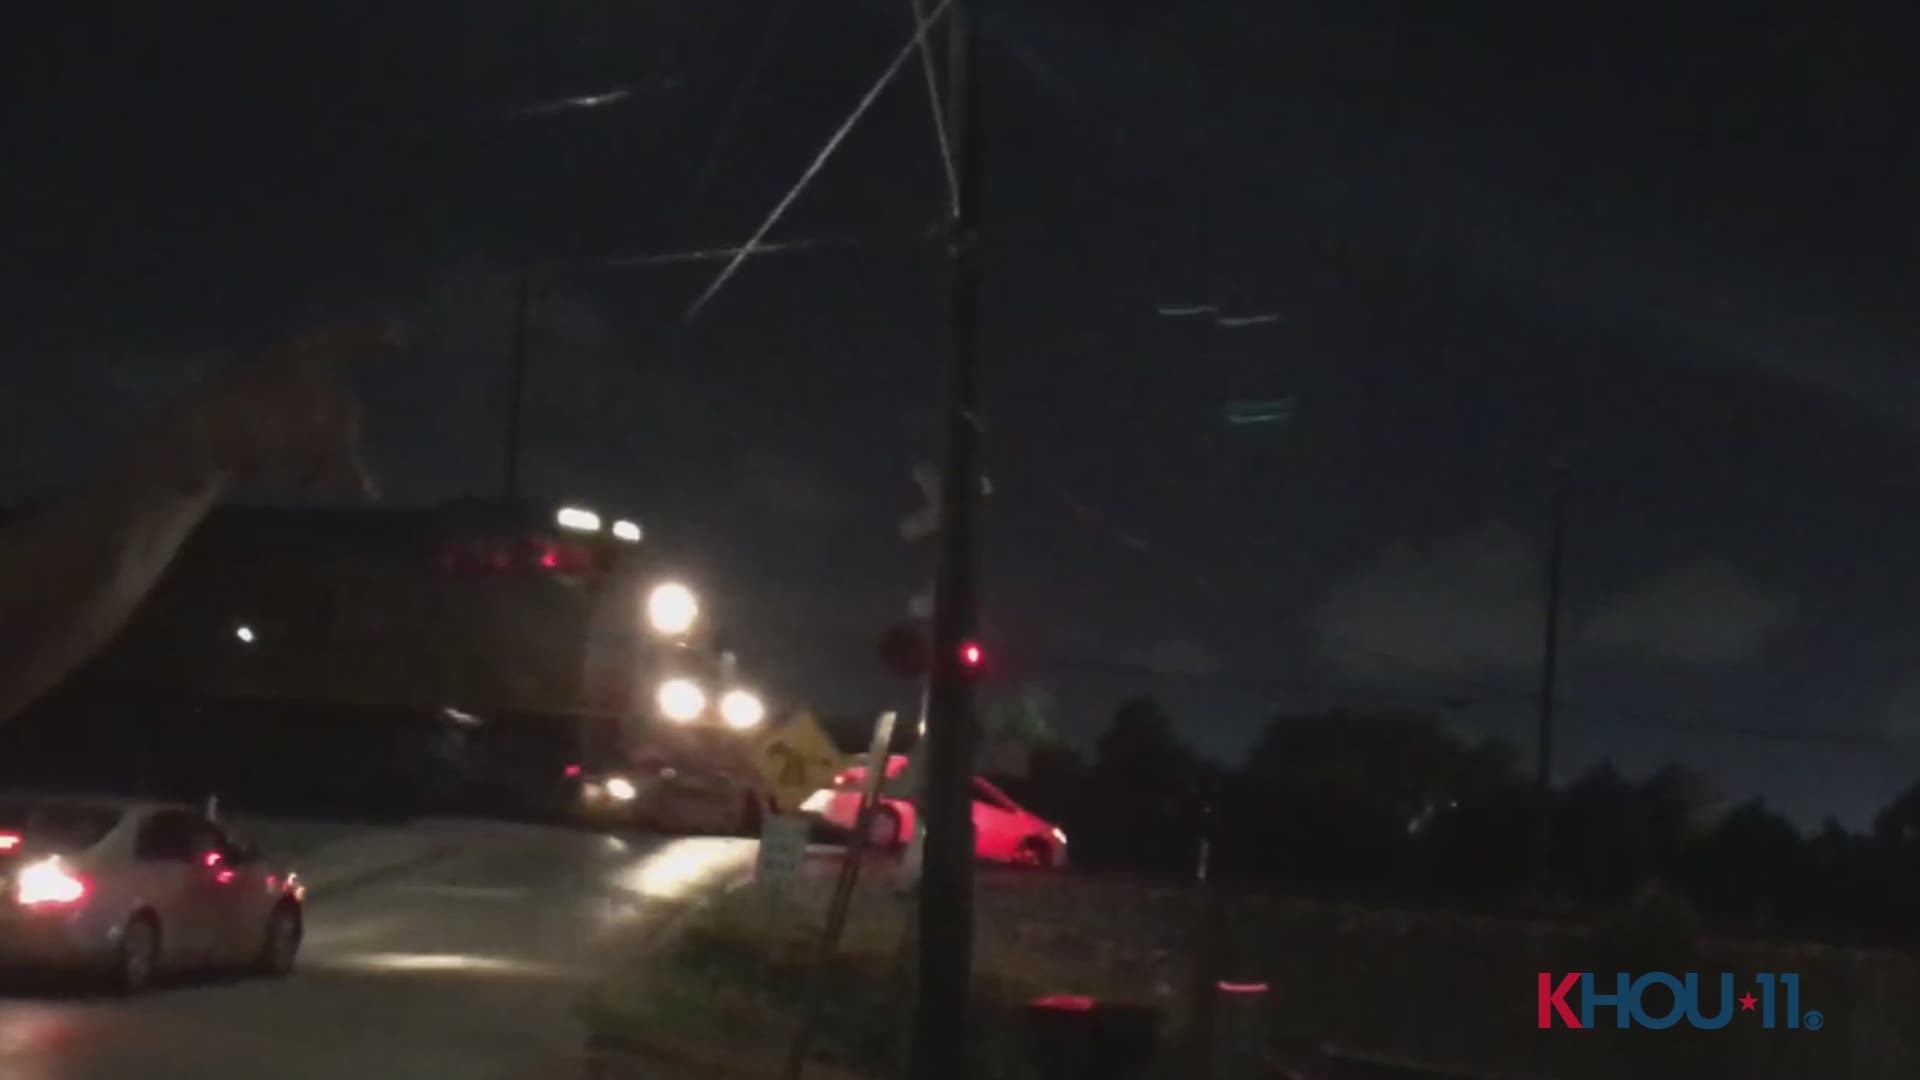 Police say whoever was in the car thankfully got out before the collision. The video shows the train slinging the car off the tracks